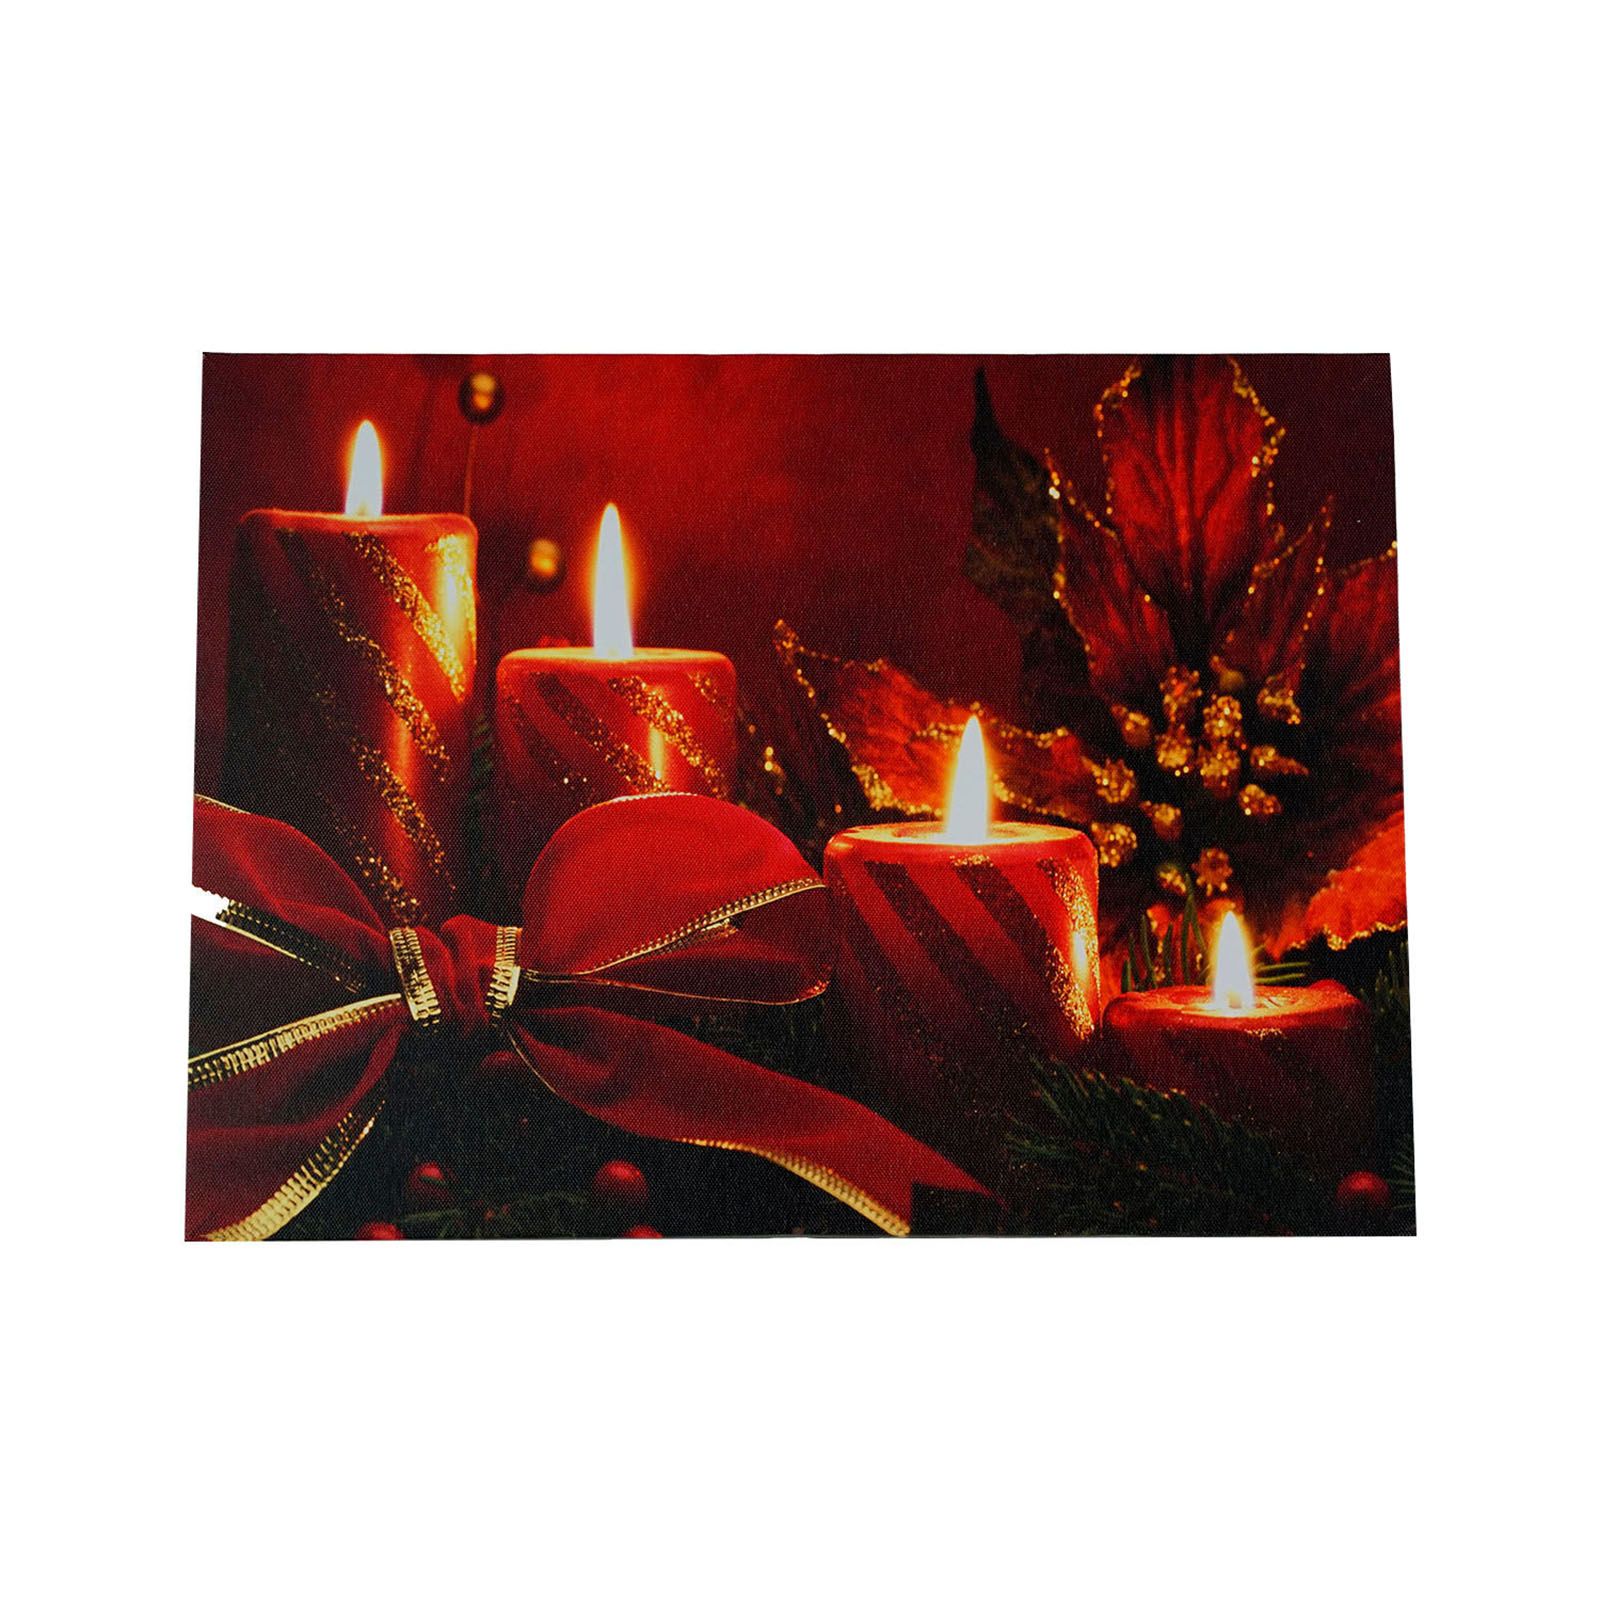 Northlight Red Glitter Striped Candles with Poinsettia and Bow Christmas Wall Art - LED Lighted